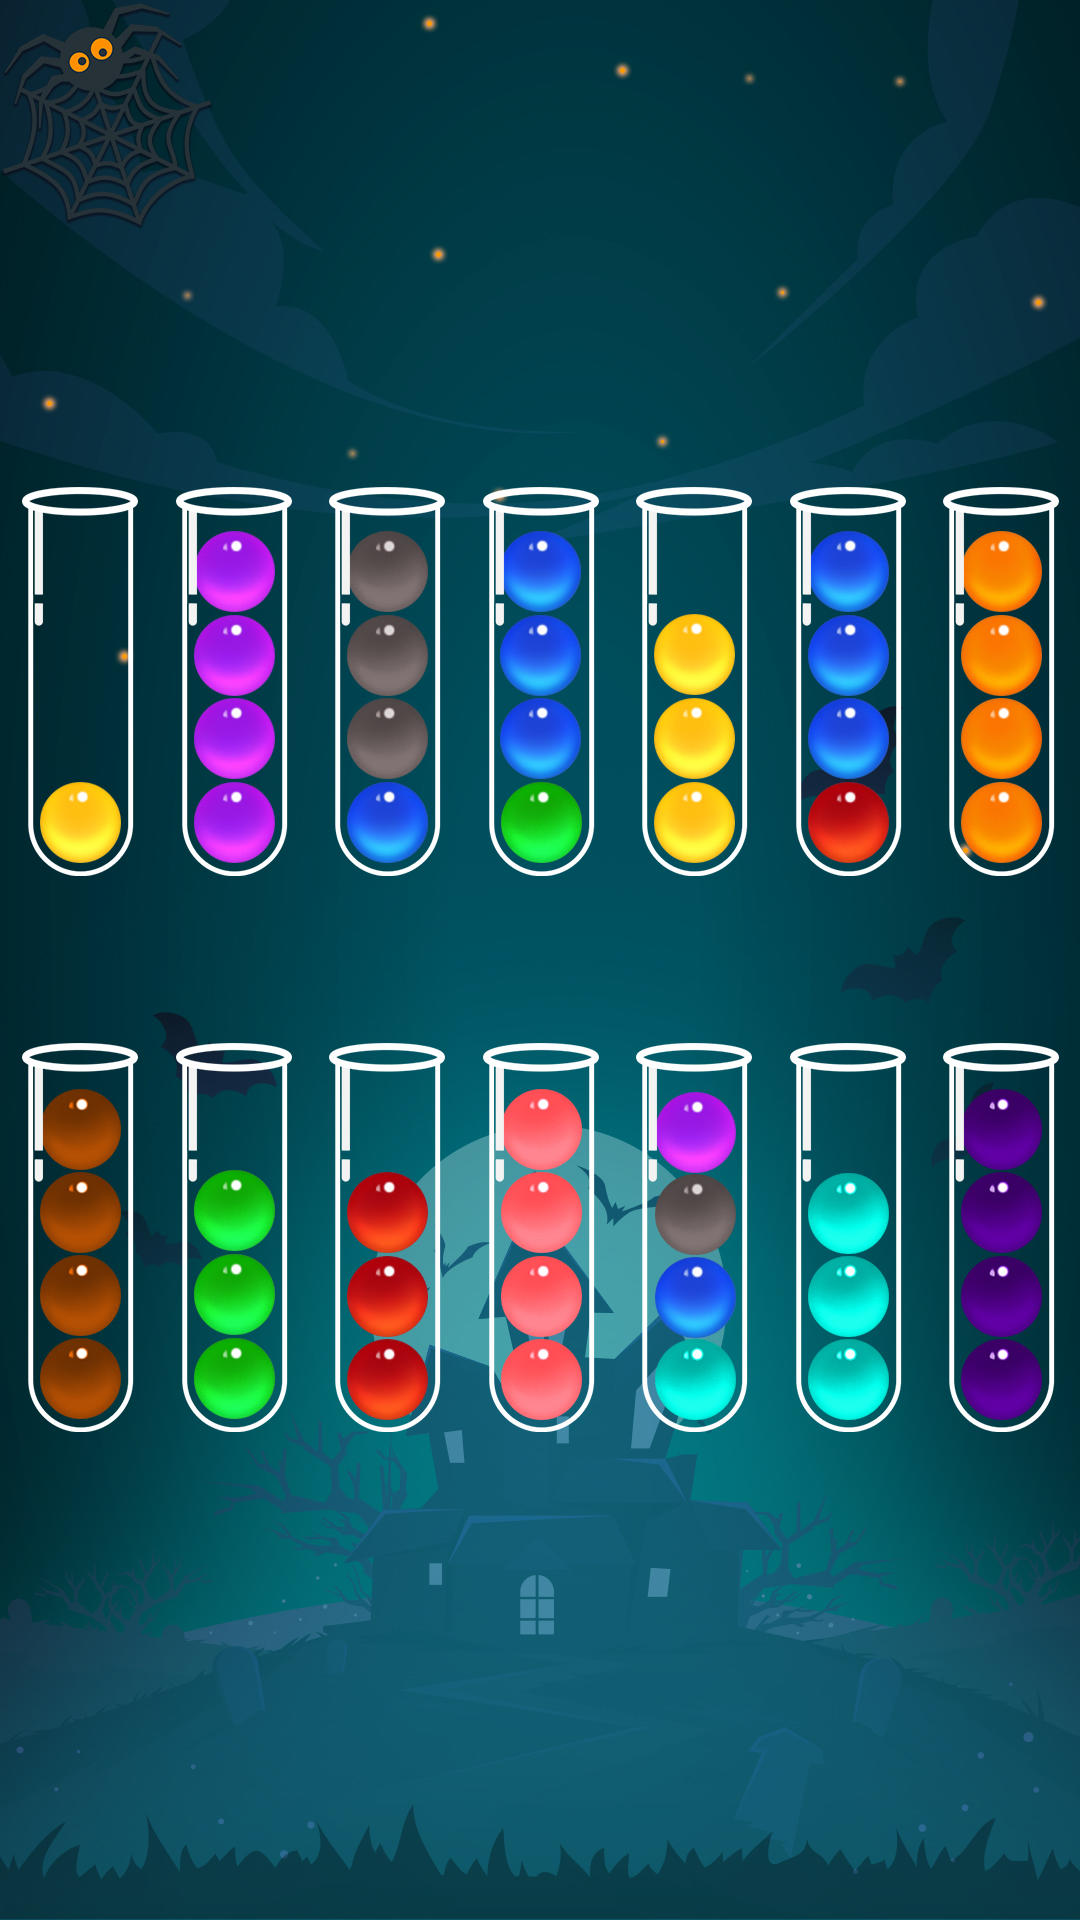 Screenshot 1 of Ball Sort - Color Puzzle Game 19.0.0